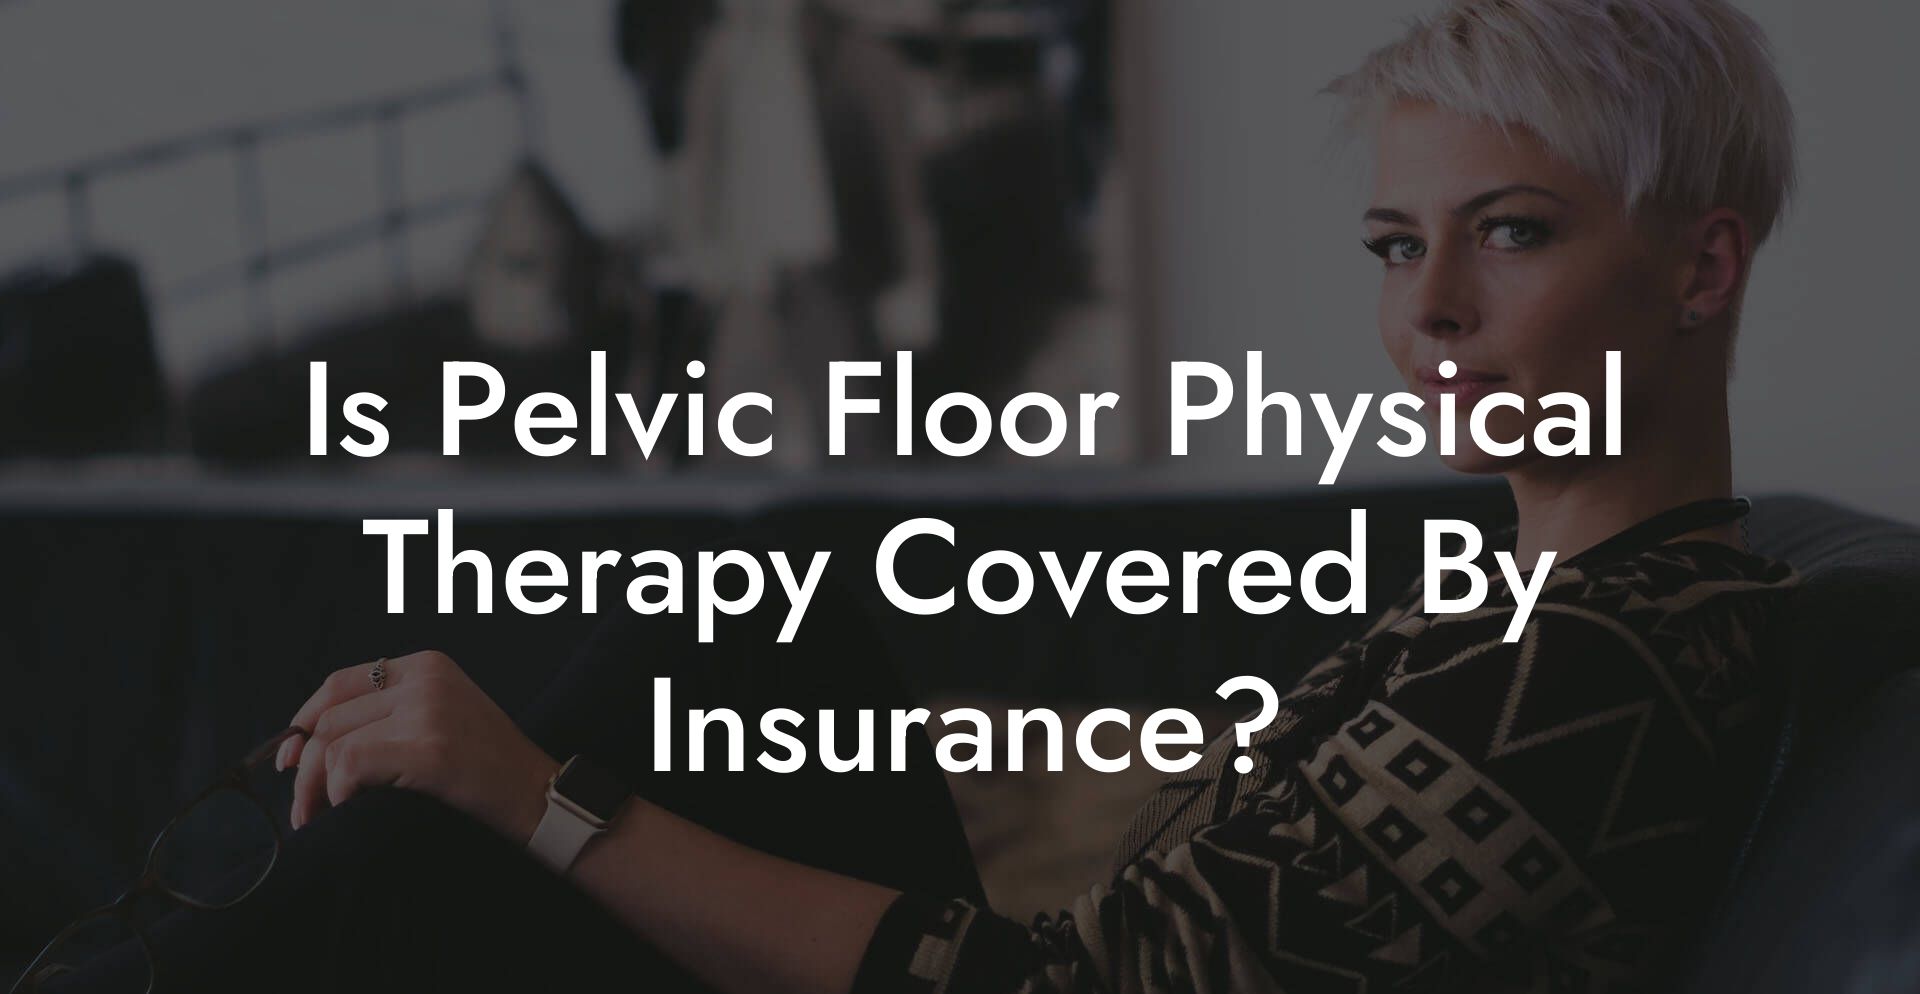 Is Pelvic Floor Physical Therapy Covered By Insurance?